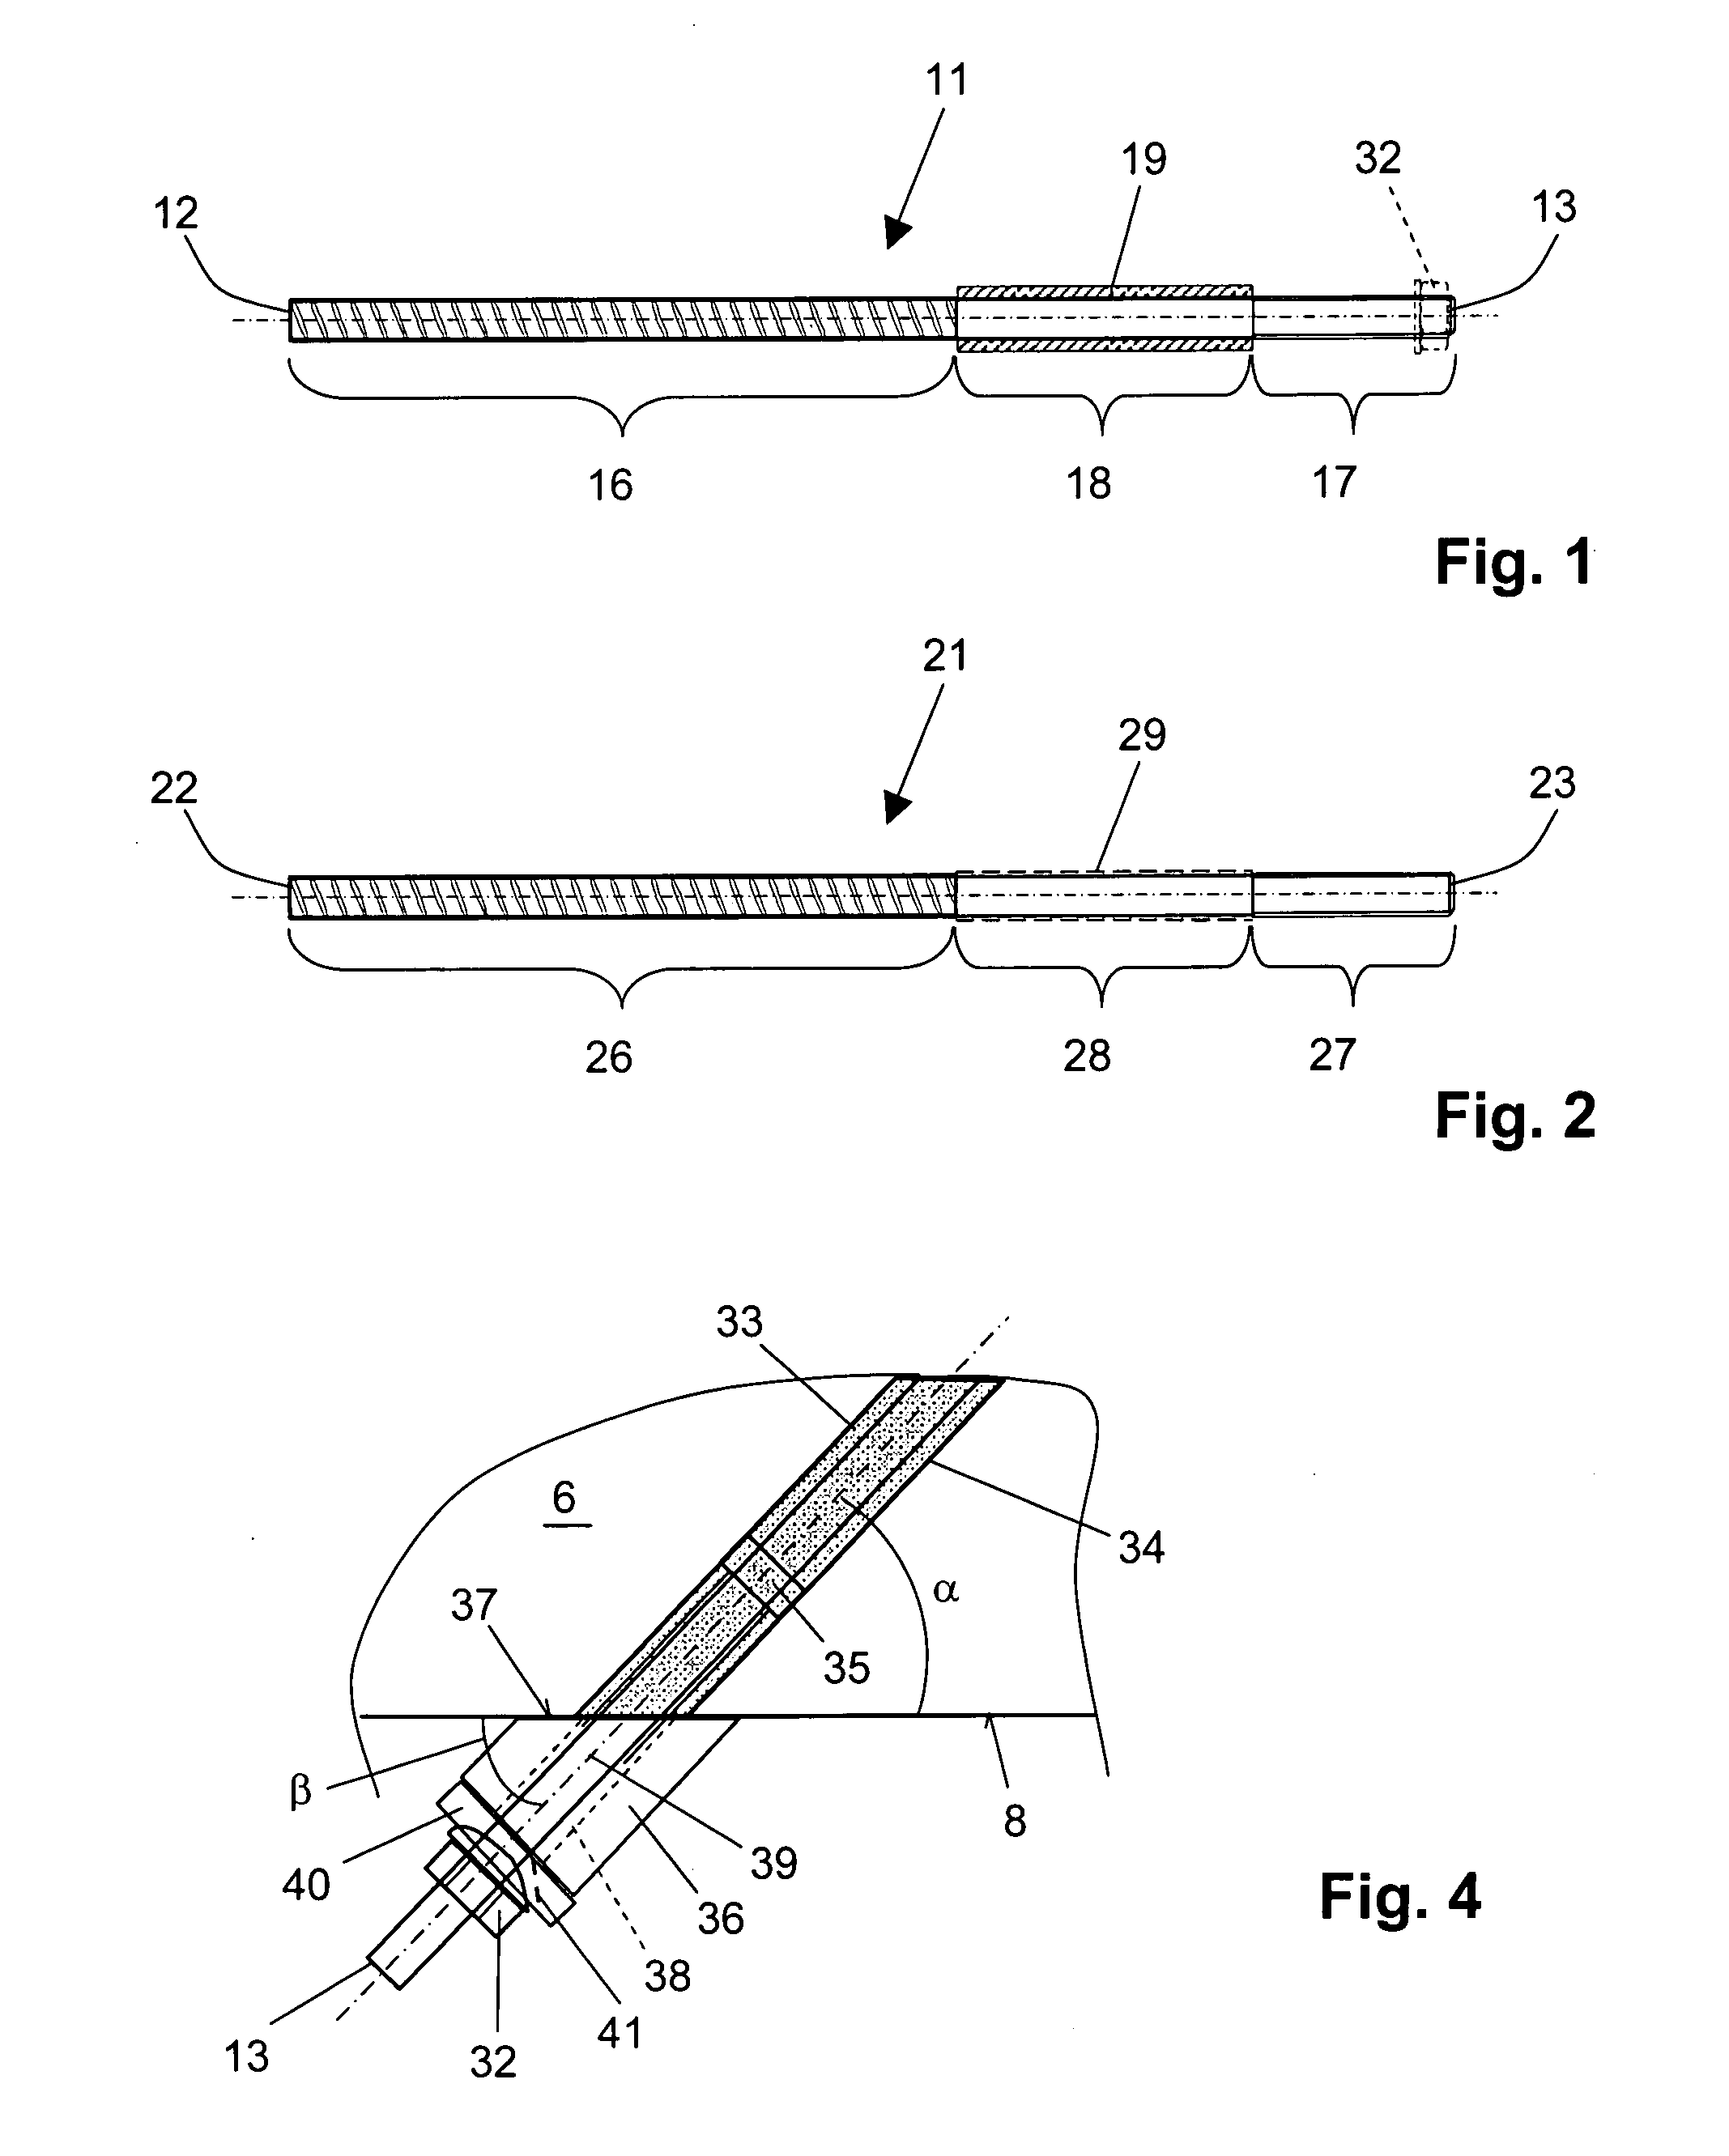 Anchor bar and arrangement for reinforcing existing components against punching shears with such anchor bar